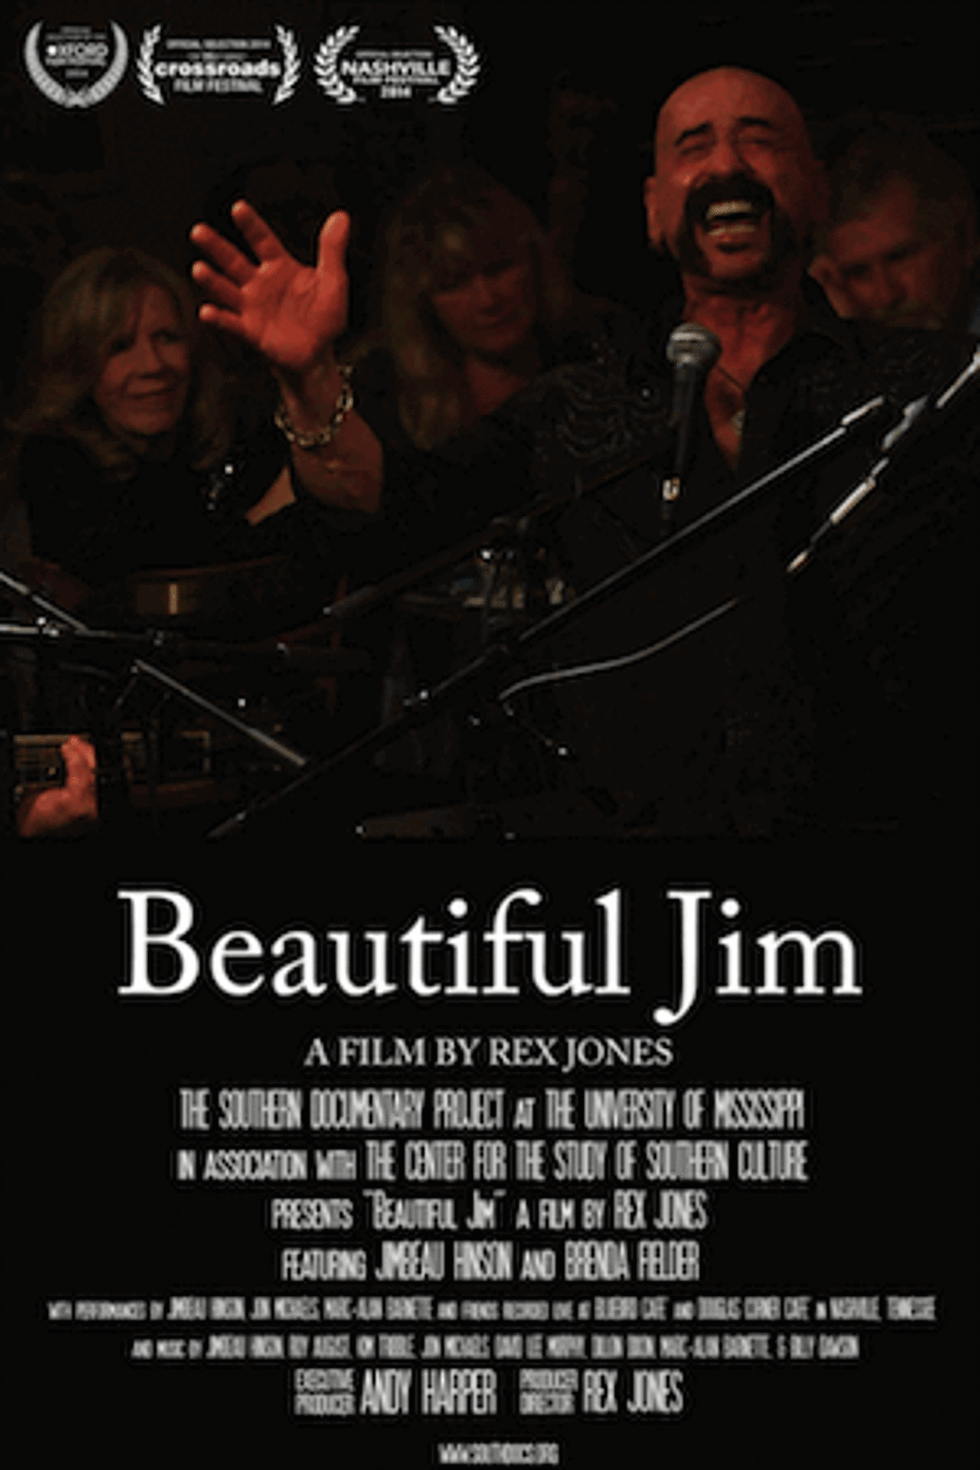 &#8216;Beautiful Jim&#8217; Documentary to Premiere at Nashville Film Fest